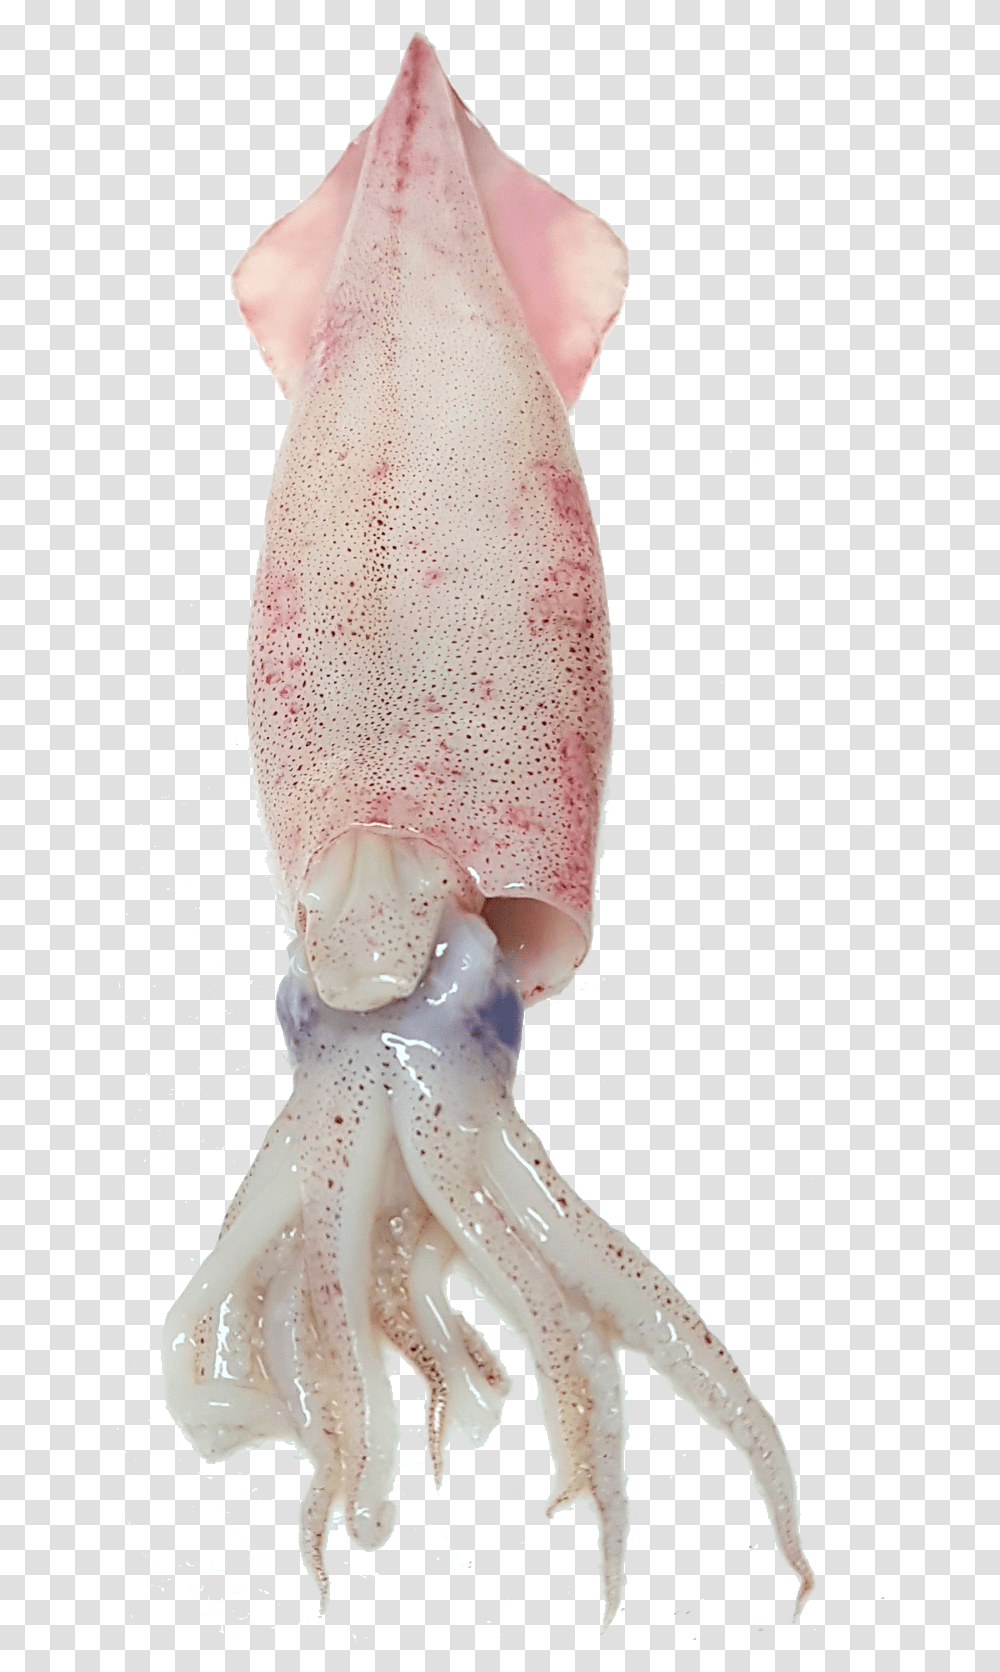 Squid Free Image Squid, Person, Sweets, Food, Acrobatic Transparent Png